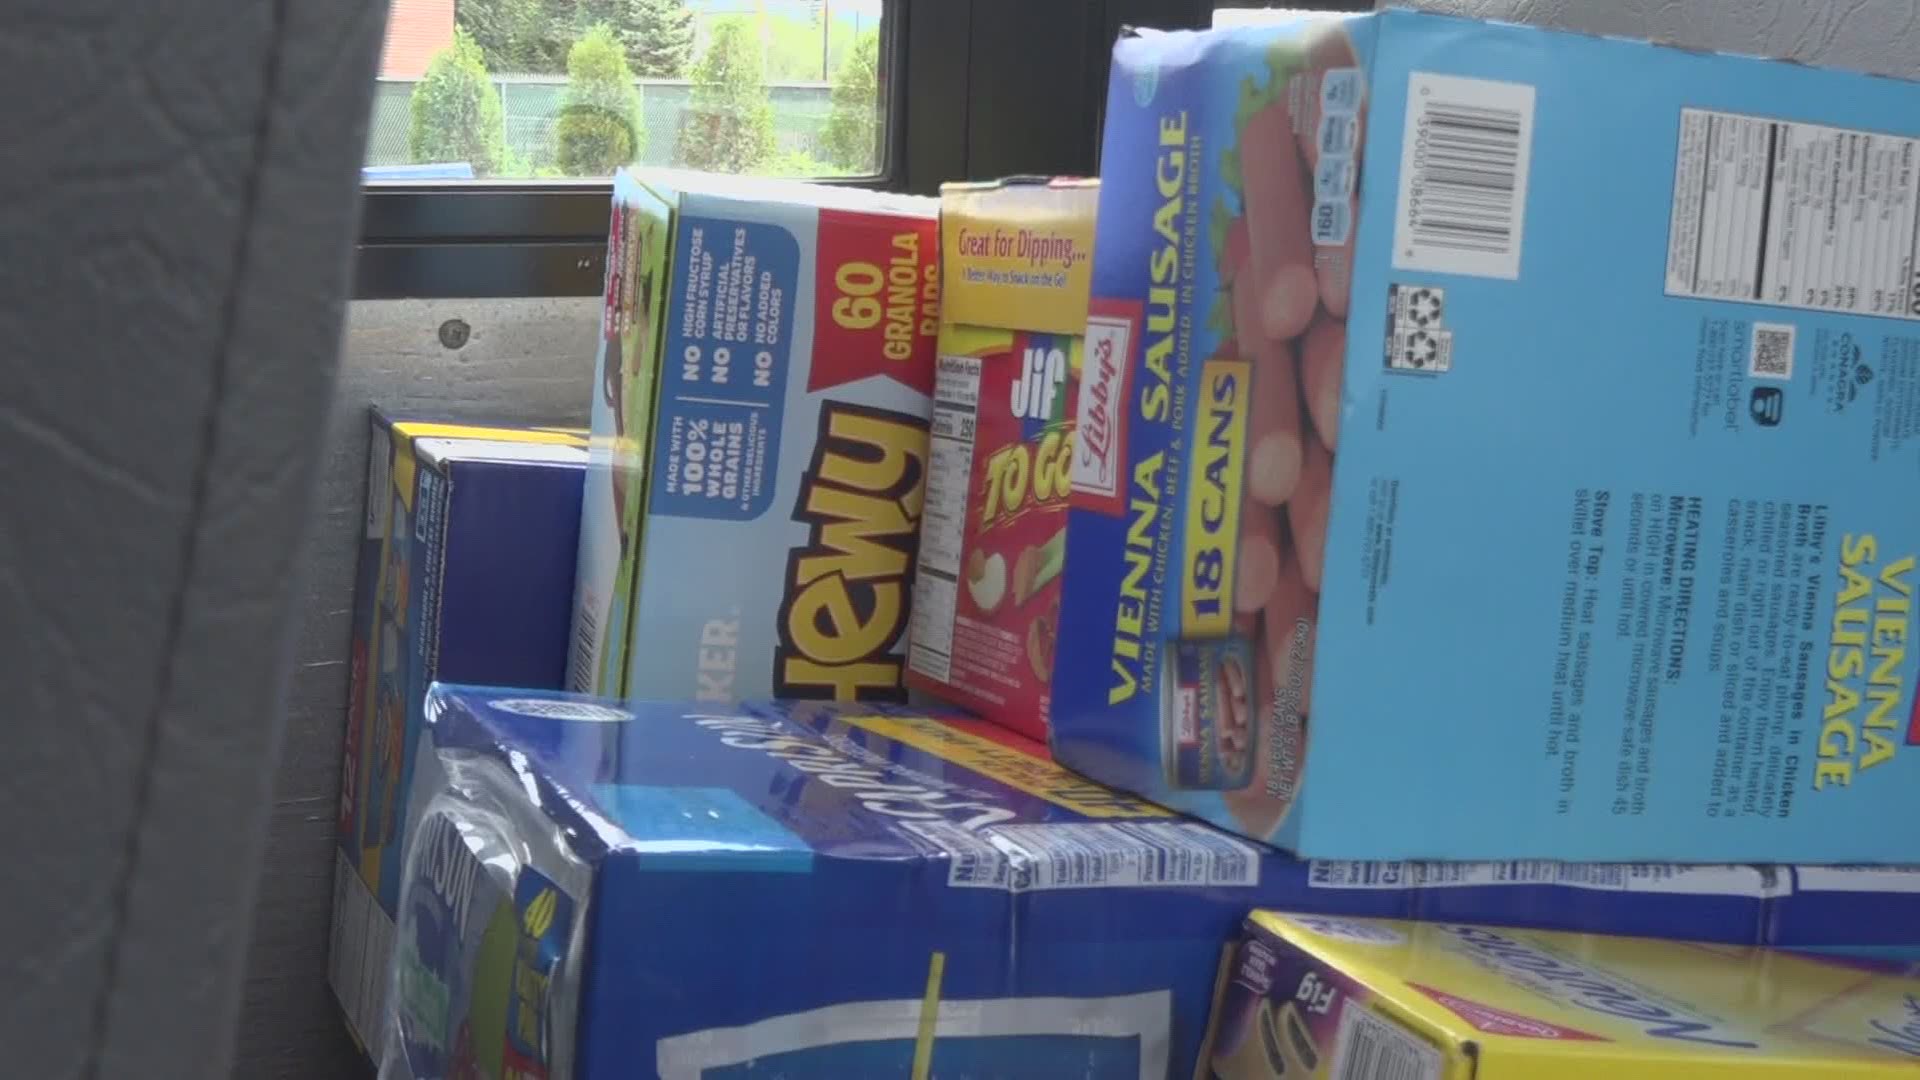 The Bangor Area Food Pantry hosted a "Fill the Bus" event at the Hannaford in Brewer.